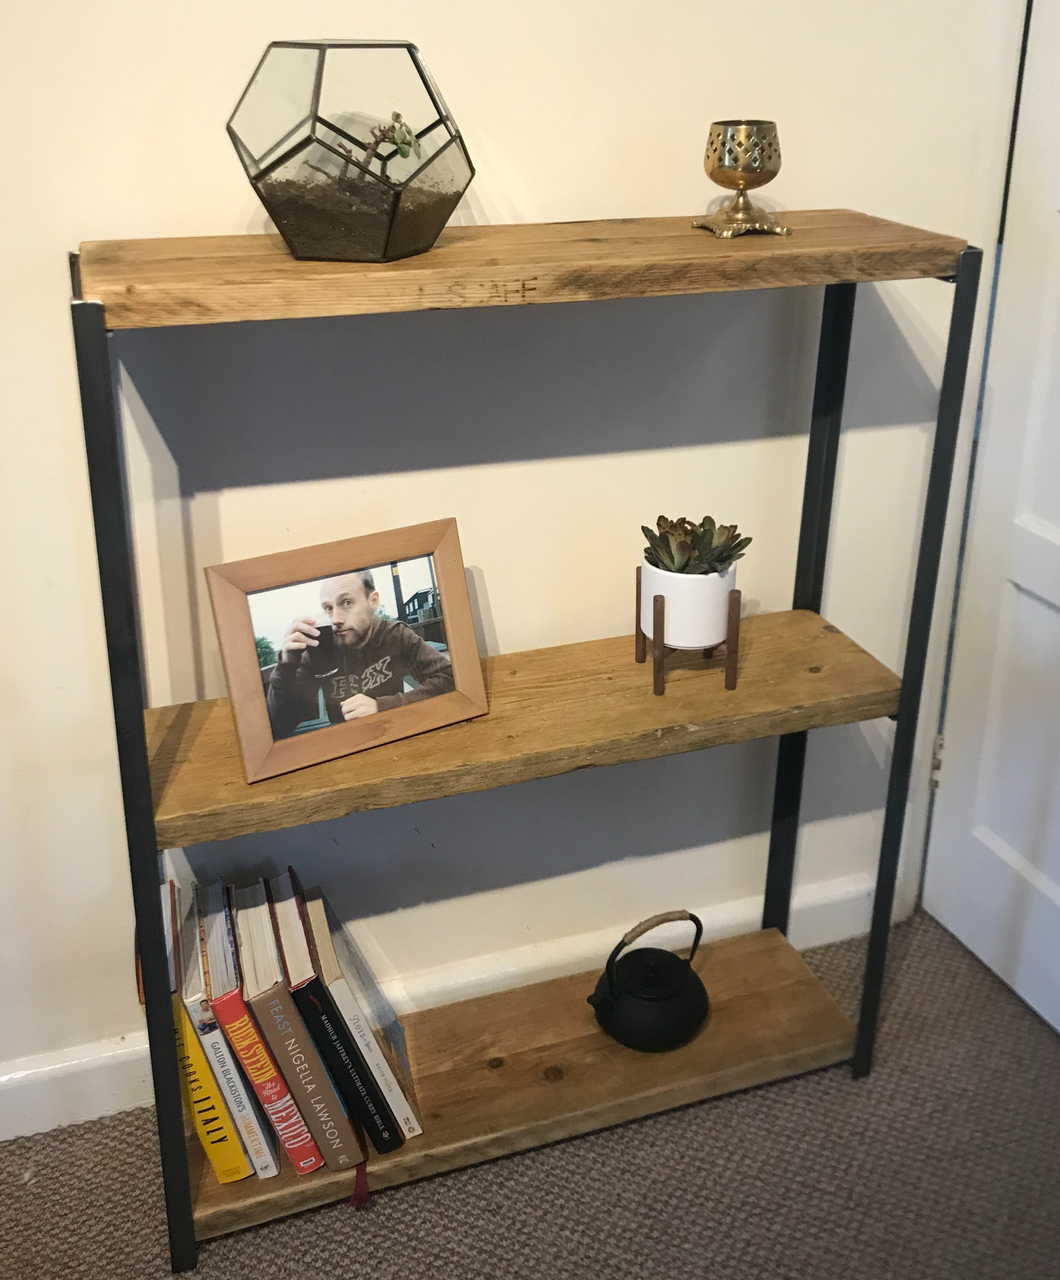 Rustic Shelves, Handmade from Reclaimed Scaffold Boards